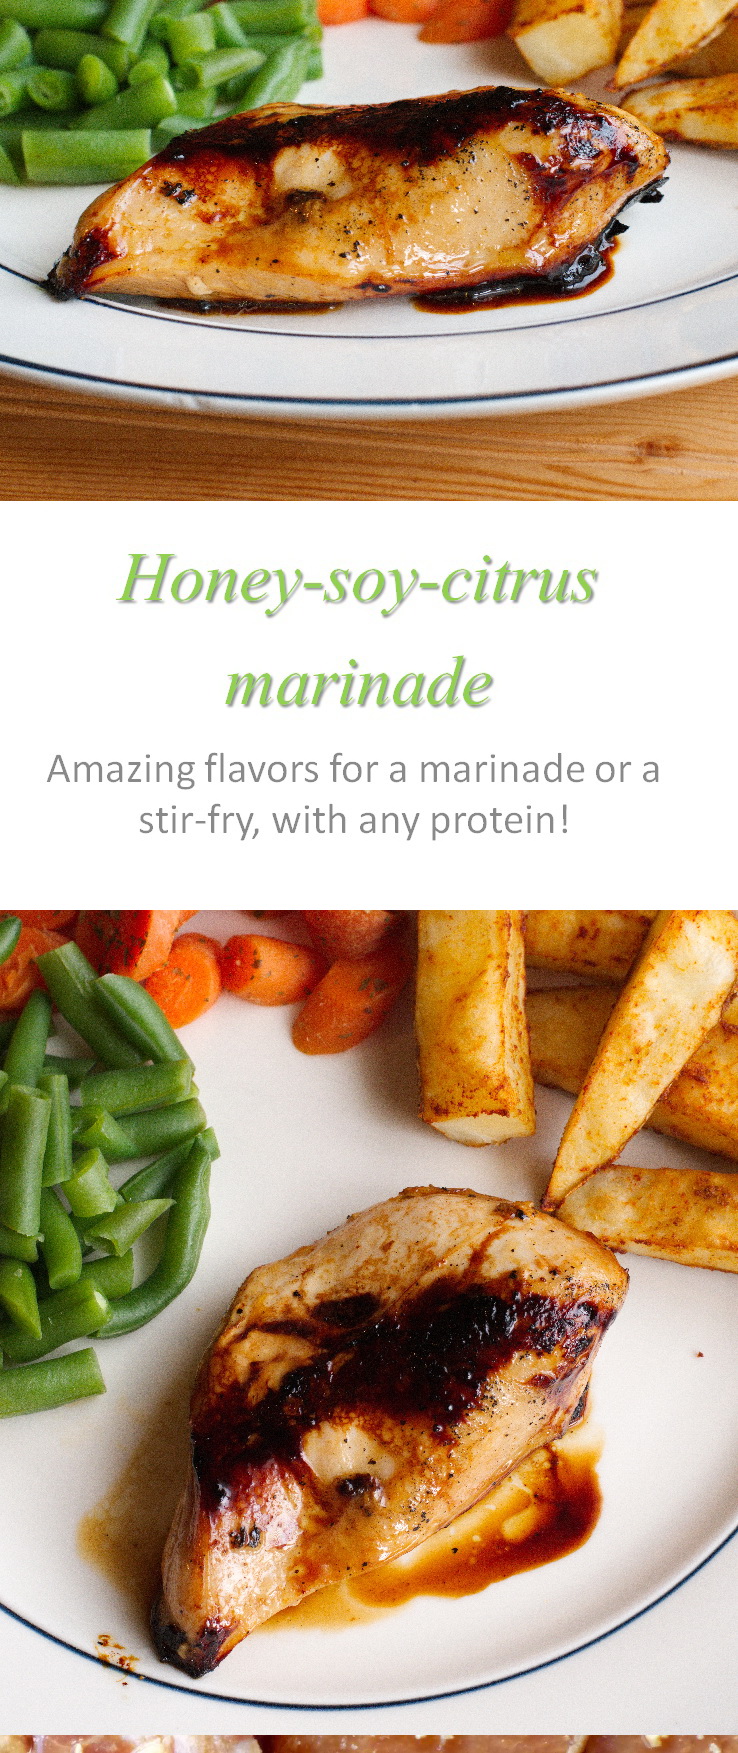 A great combination of sweet and salty, this honey soy citrus marinade can be used equally as well for simple proteins as well as stir-fry. #marinade